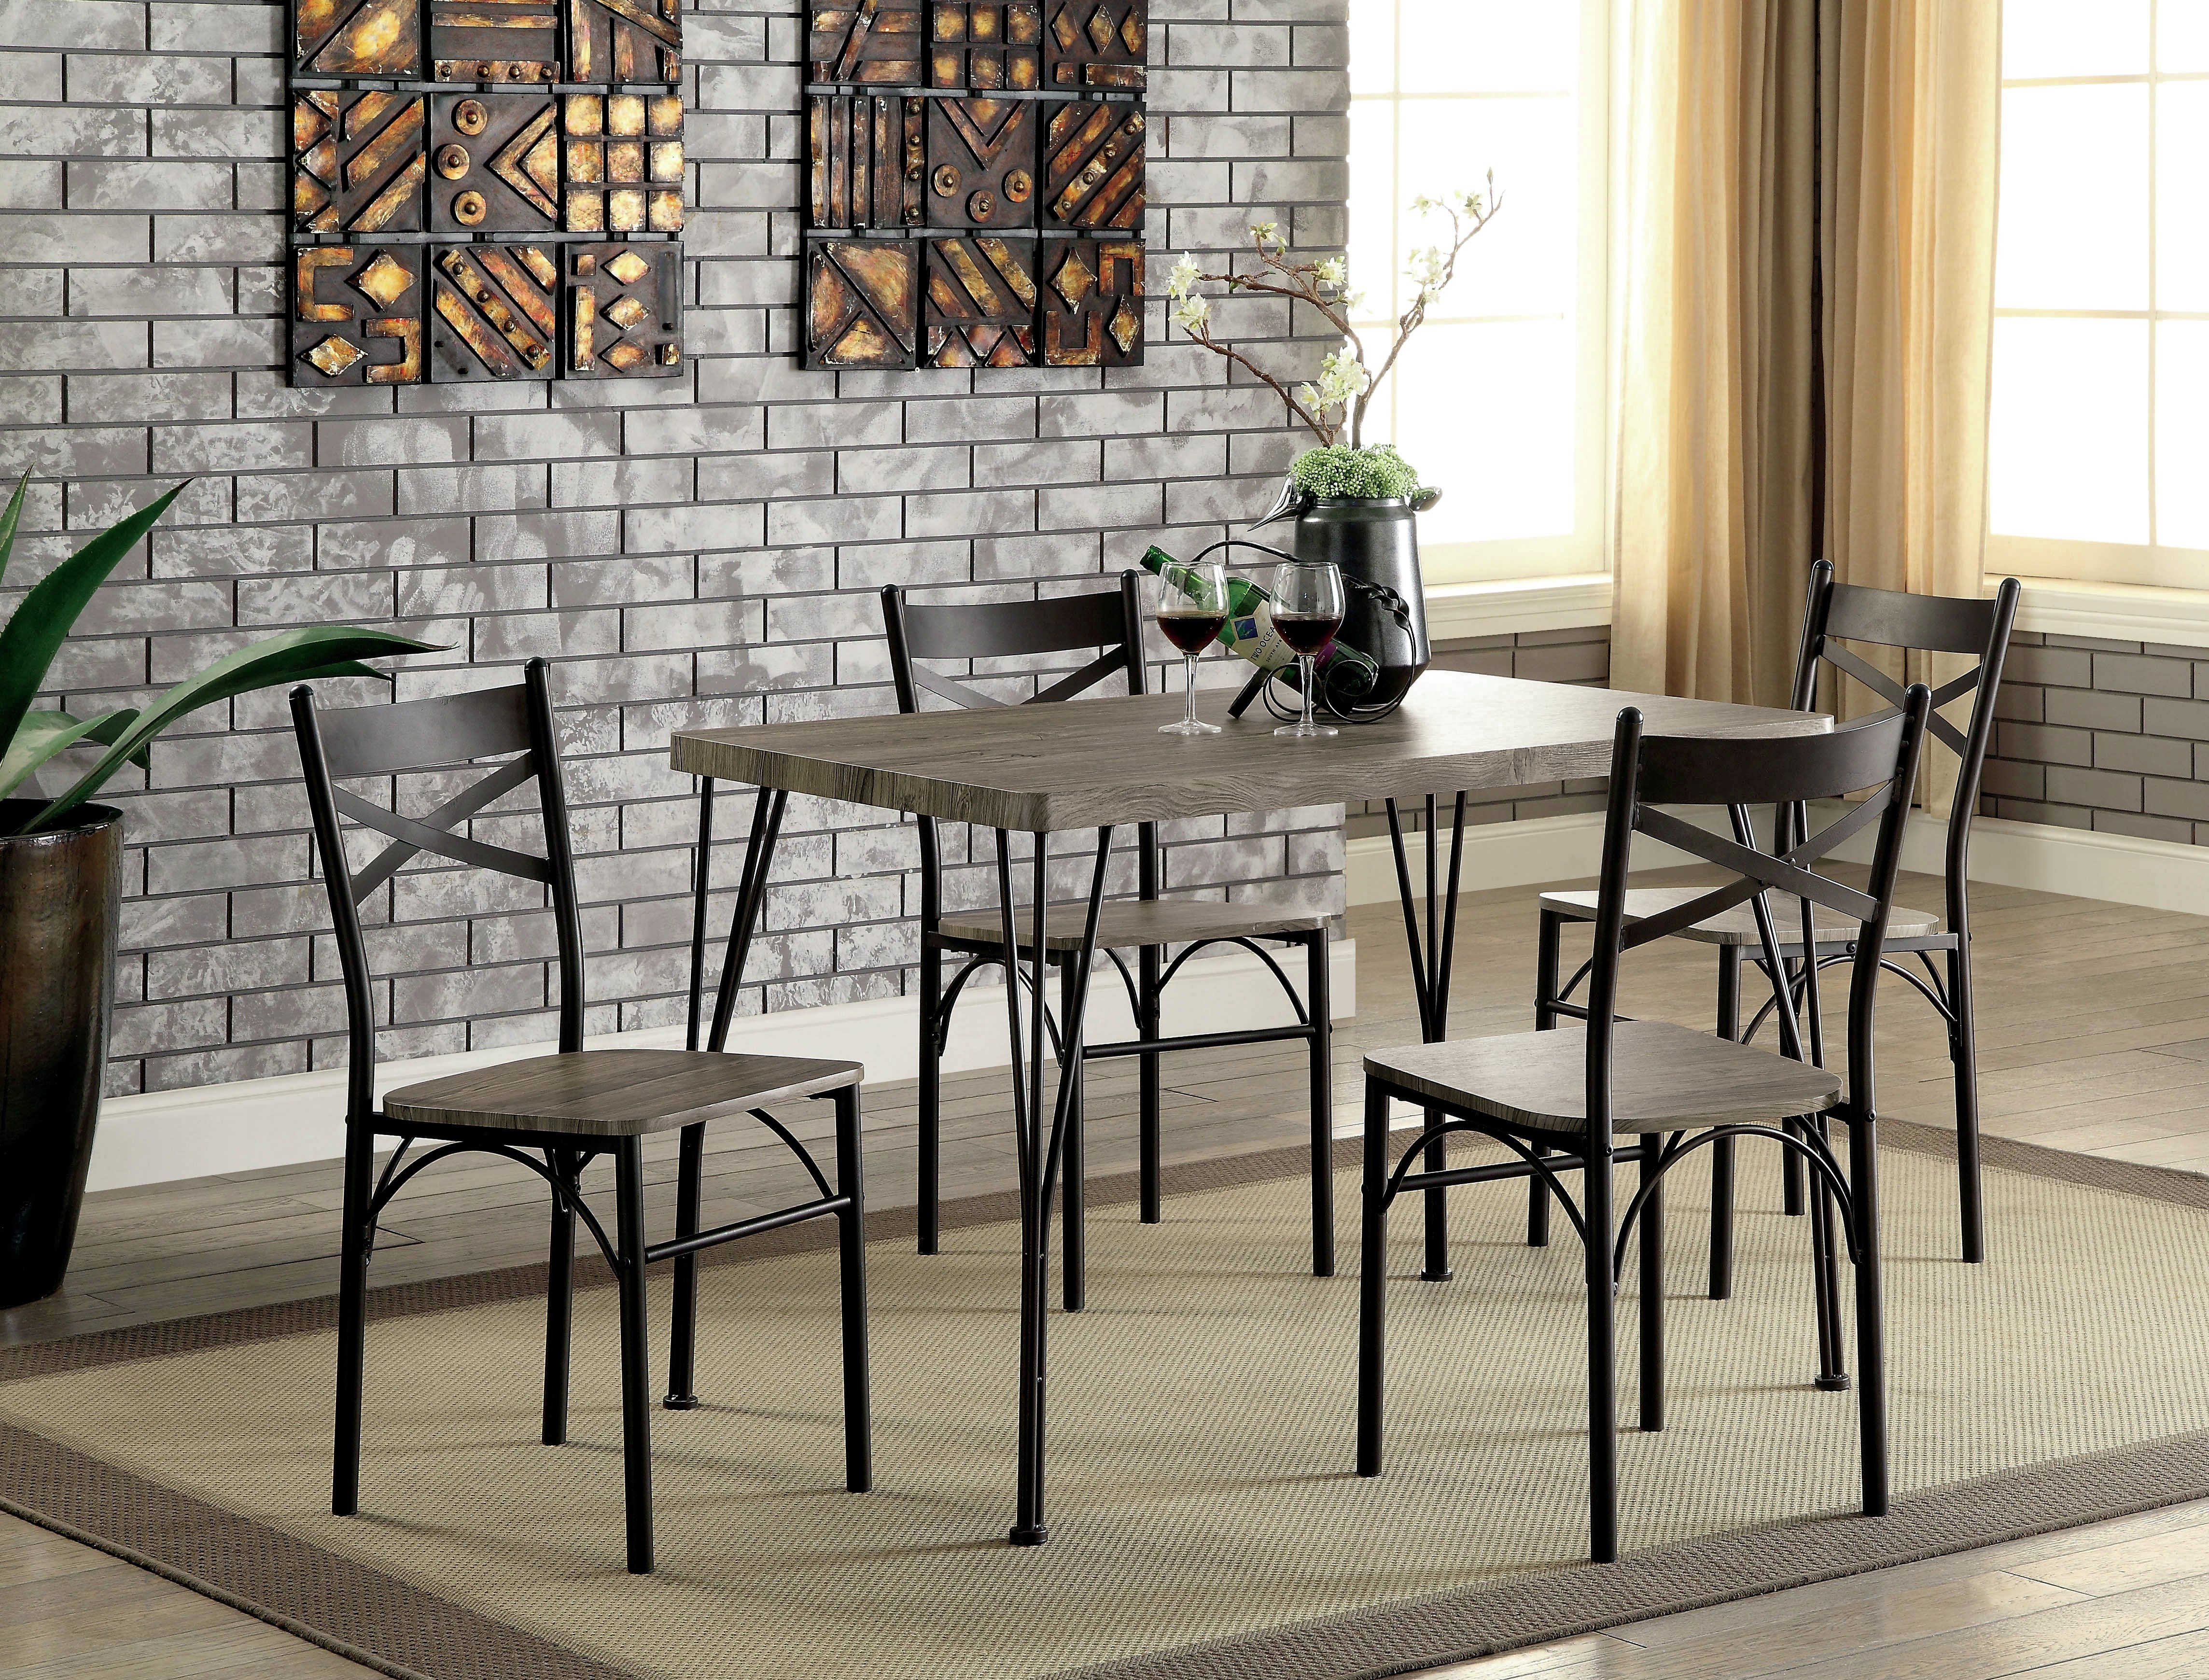 Middleport 5 Piece Dining Set For Most Recent Taulbee 5 Piece Dining Sets (View 9 of 20)